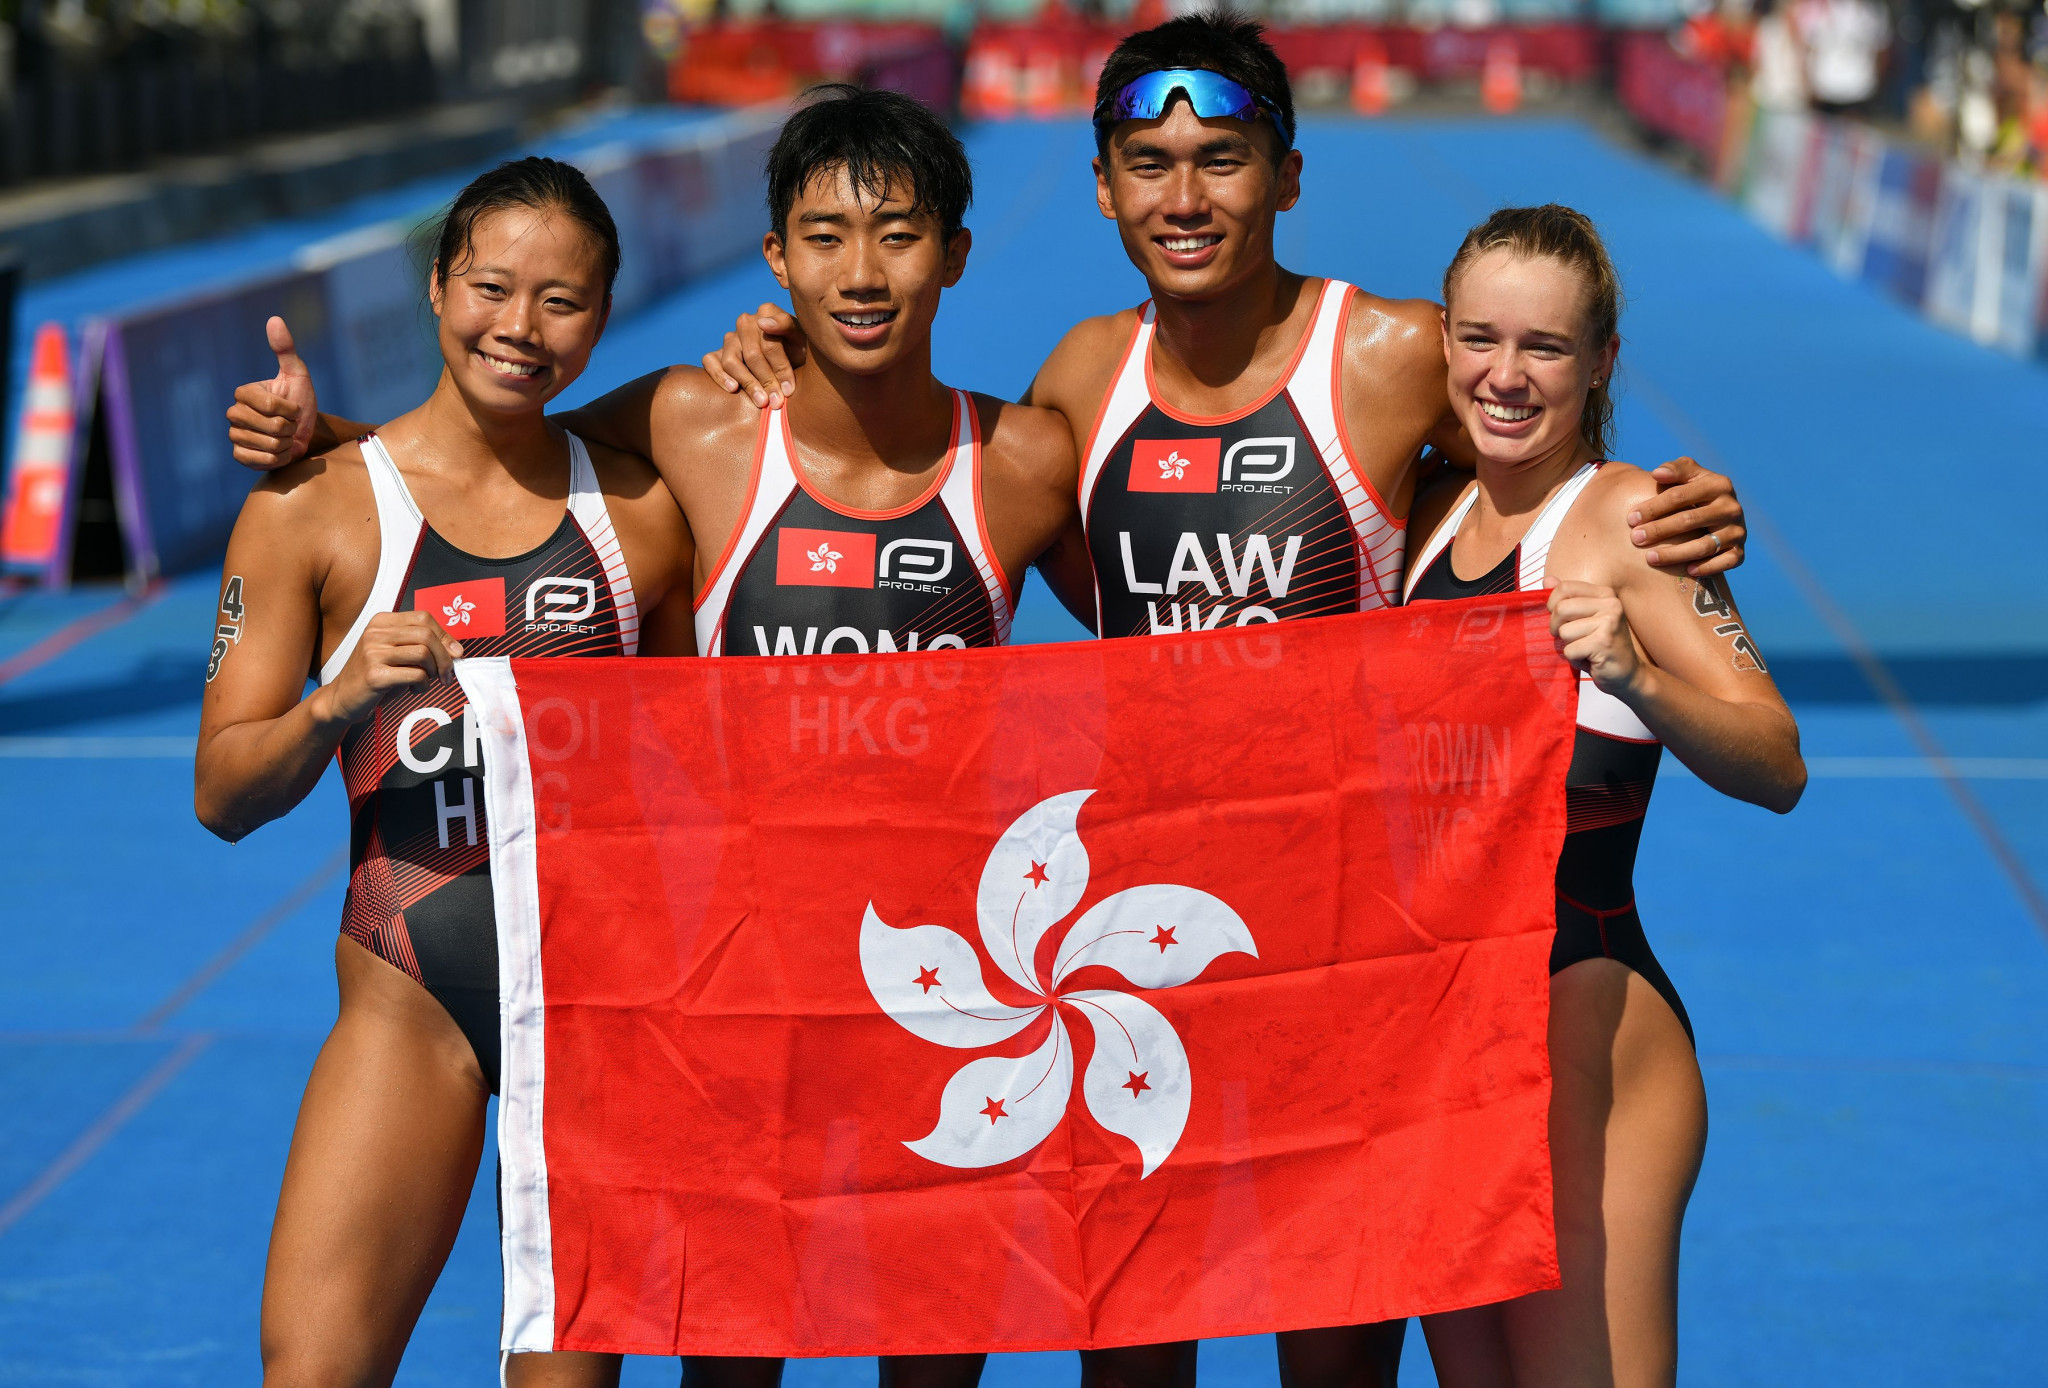 Hong Kong to hold time trial to determine duathlon team for Asian Beach Games